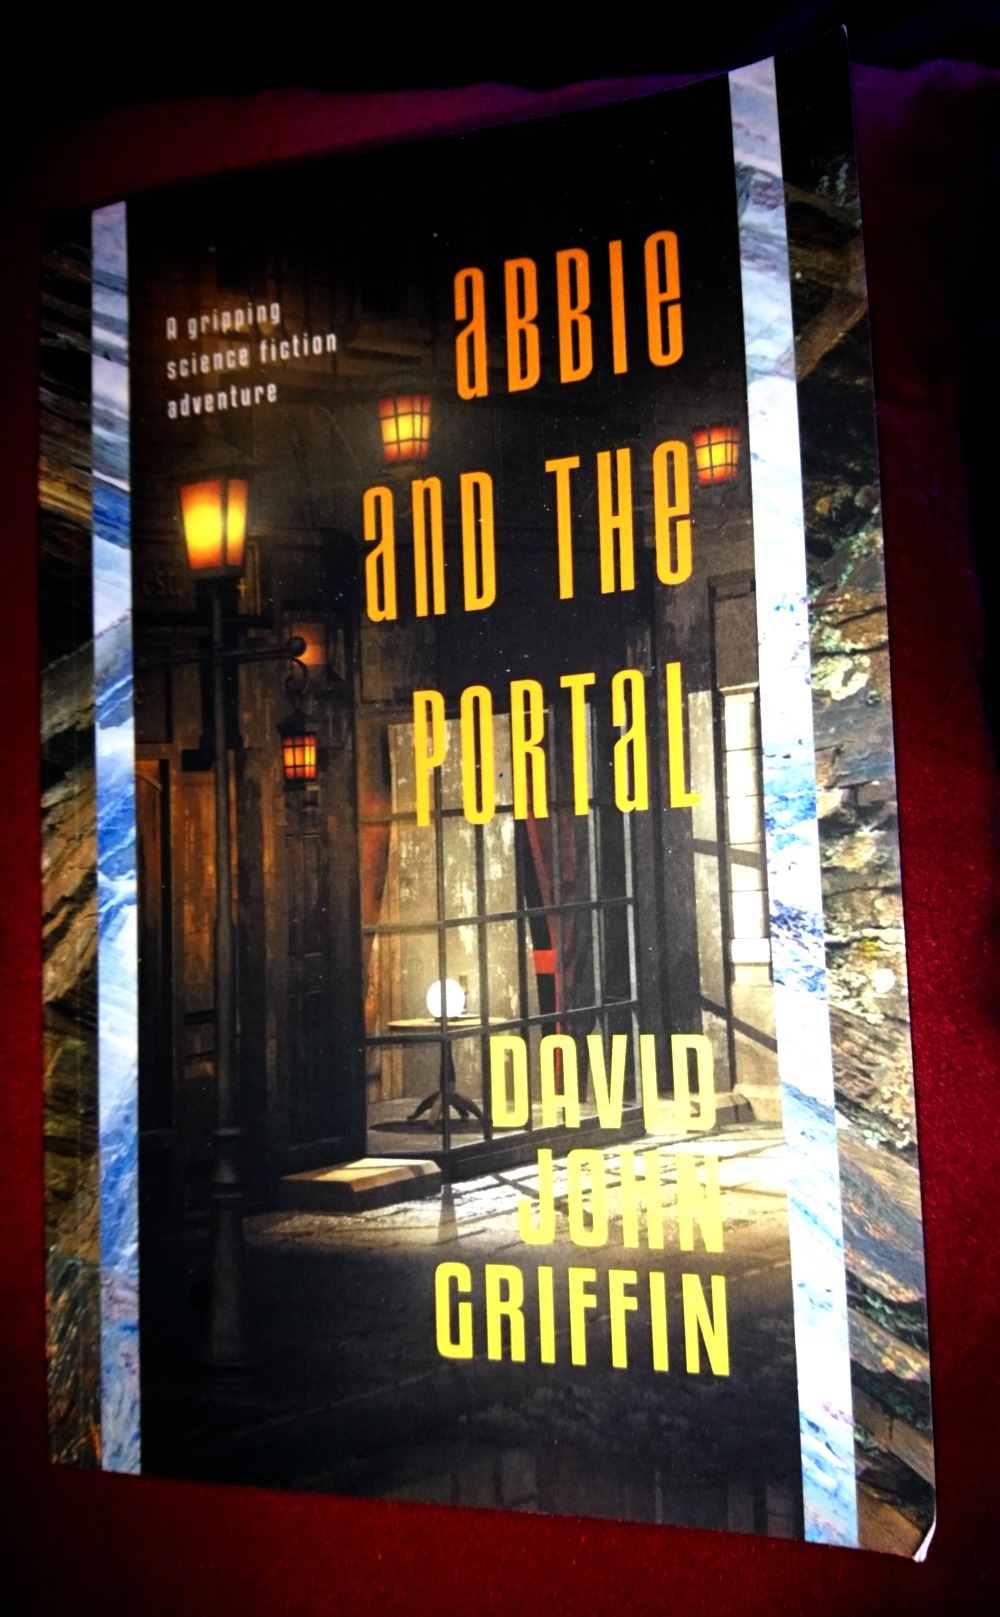 Abbie and the Portal by David John Griffin book cover